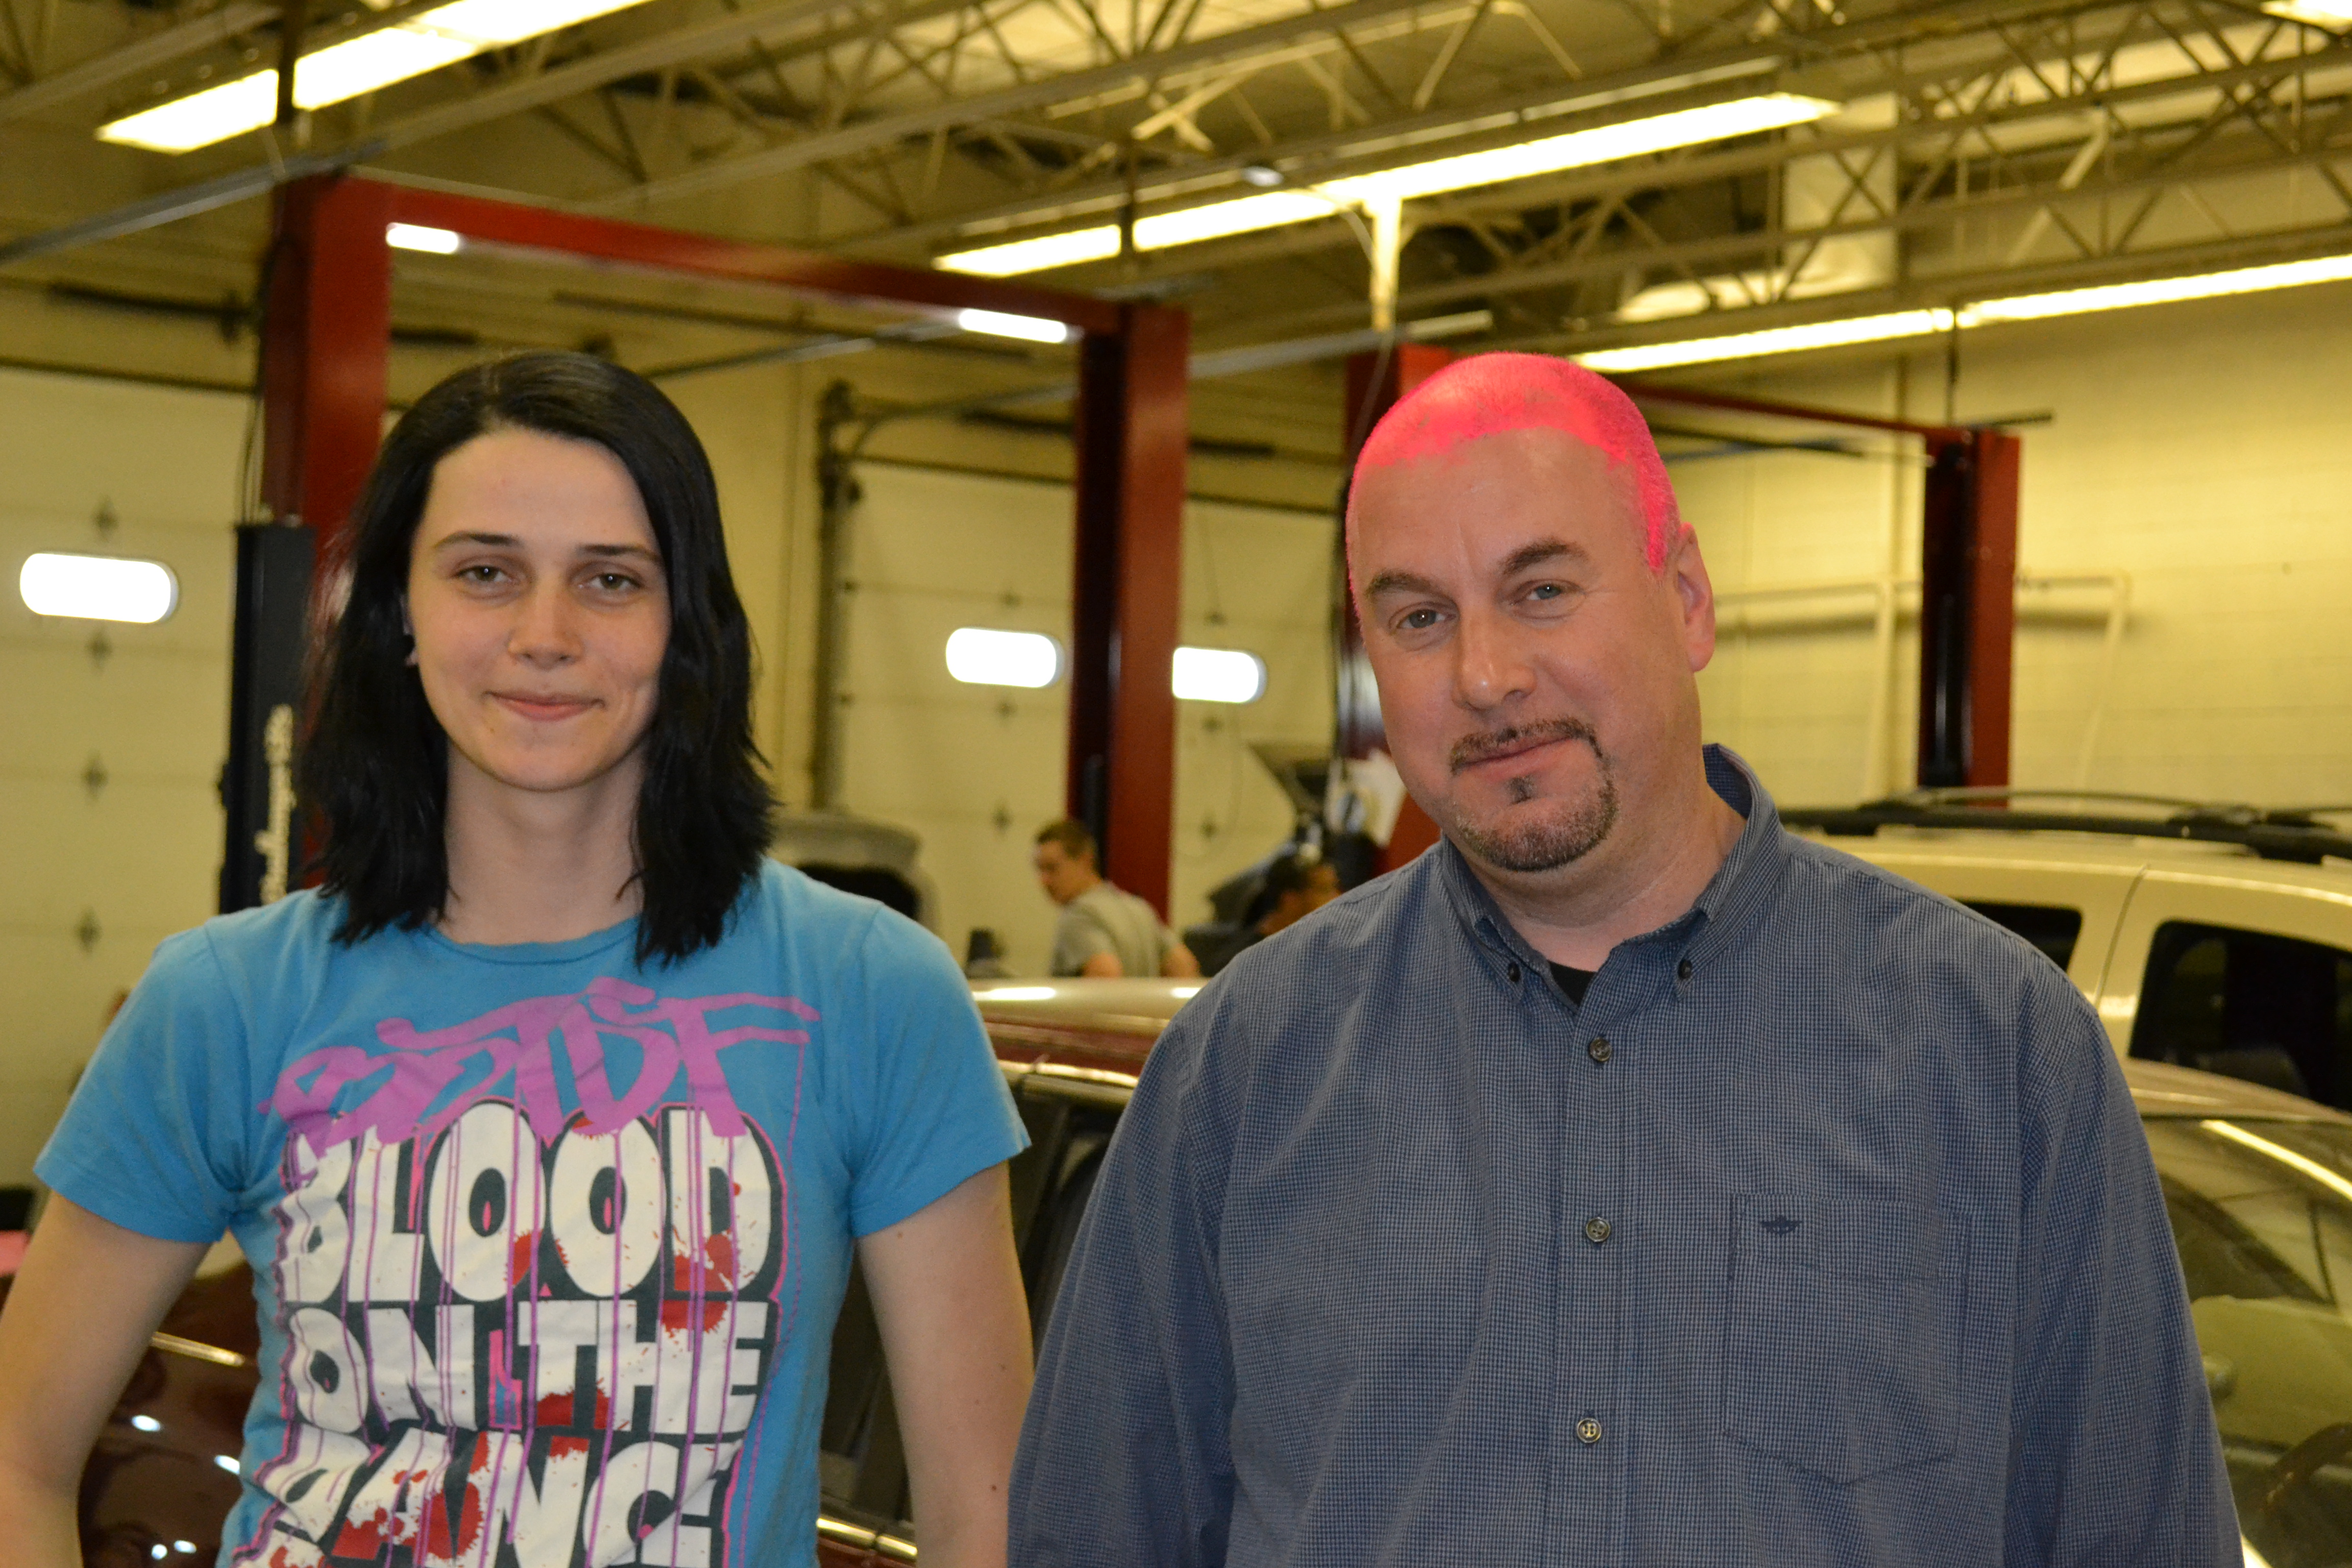 Alex Wolfe stands with her pink haired automotive teacher, Scott Freeman. The two made a bet that if Wolfe placed in the national automotive competition, he would paint his head pink.